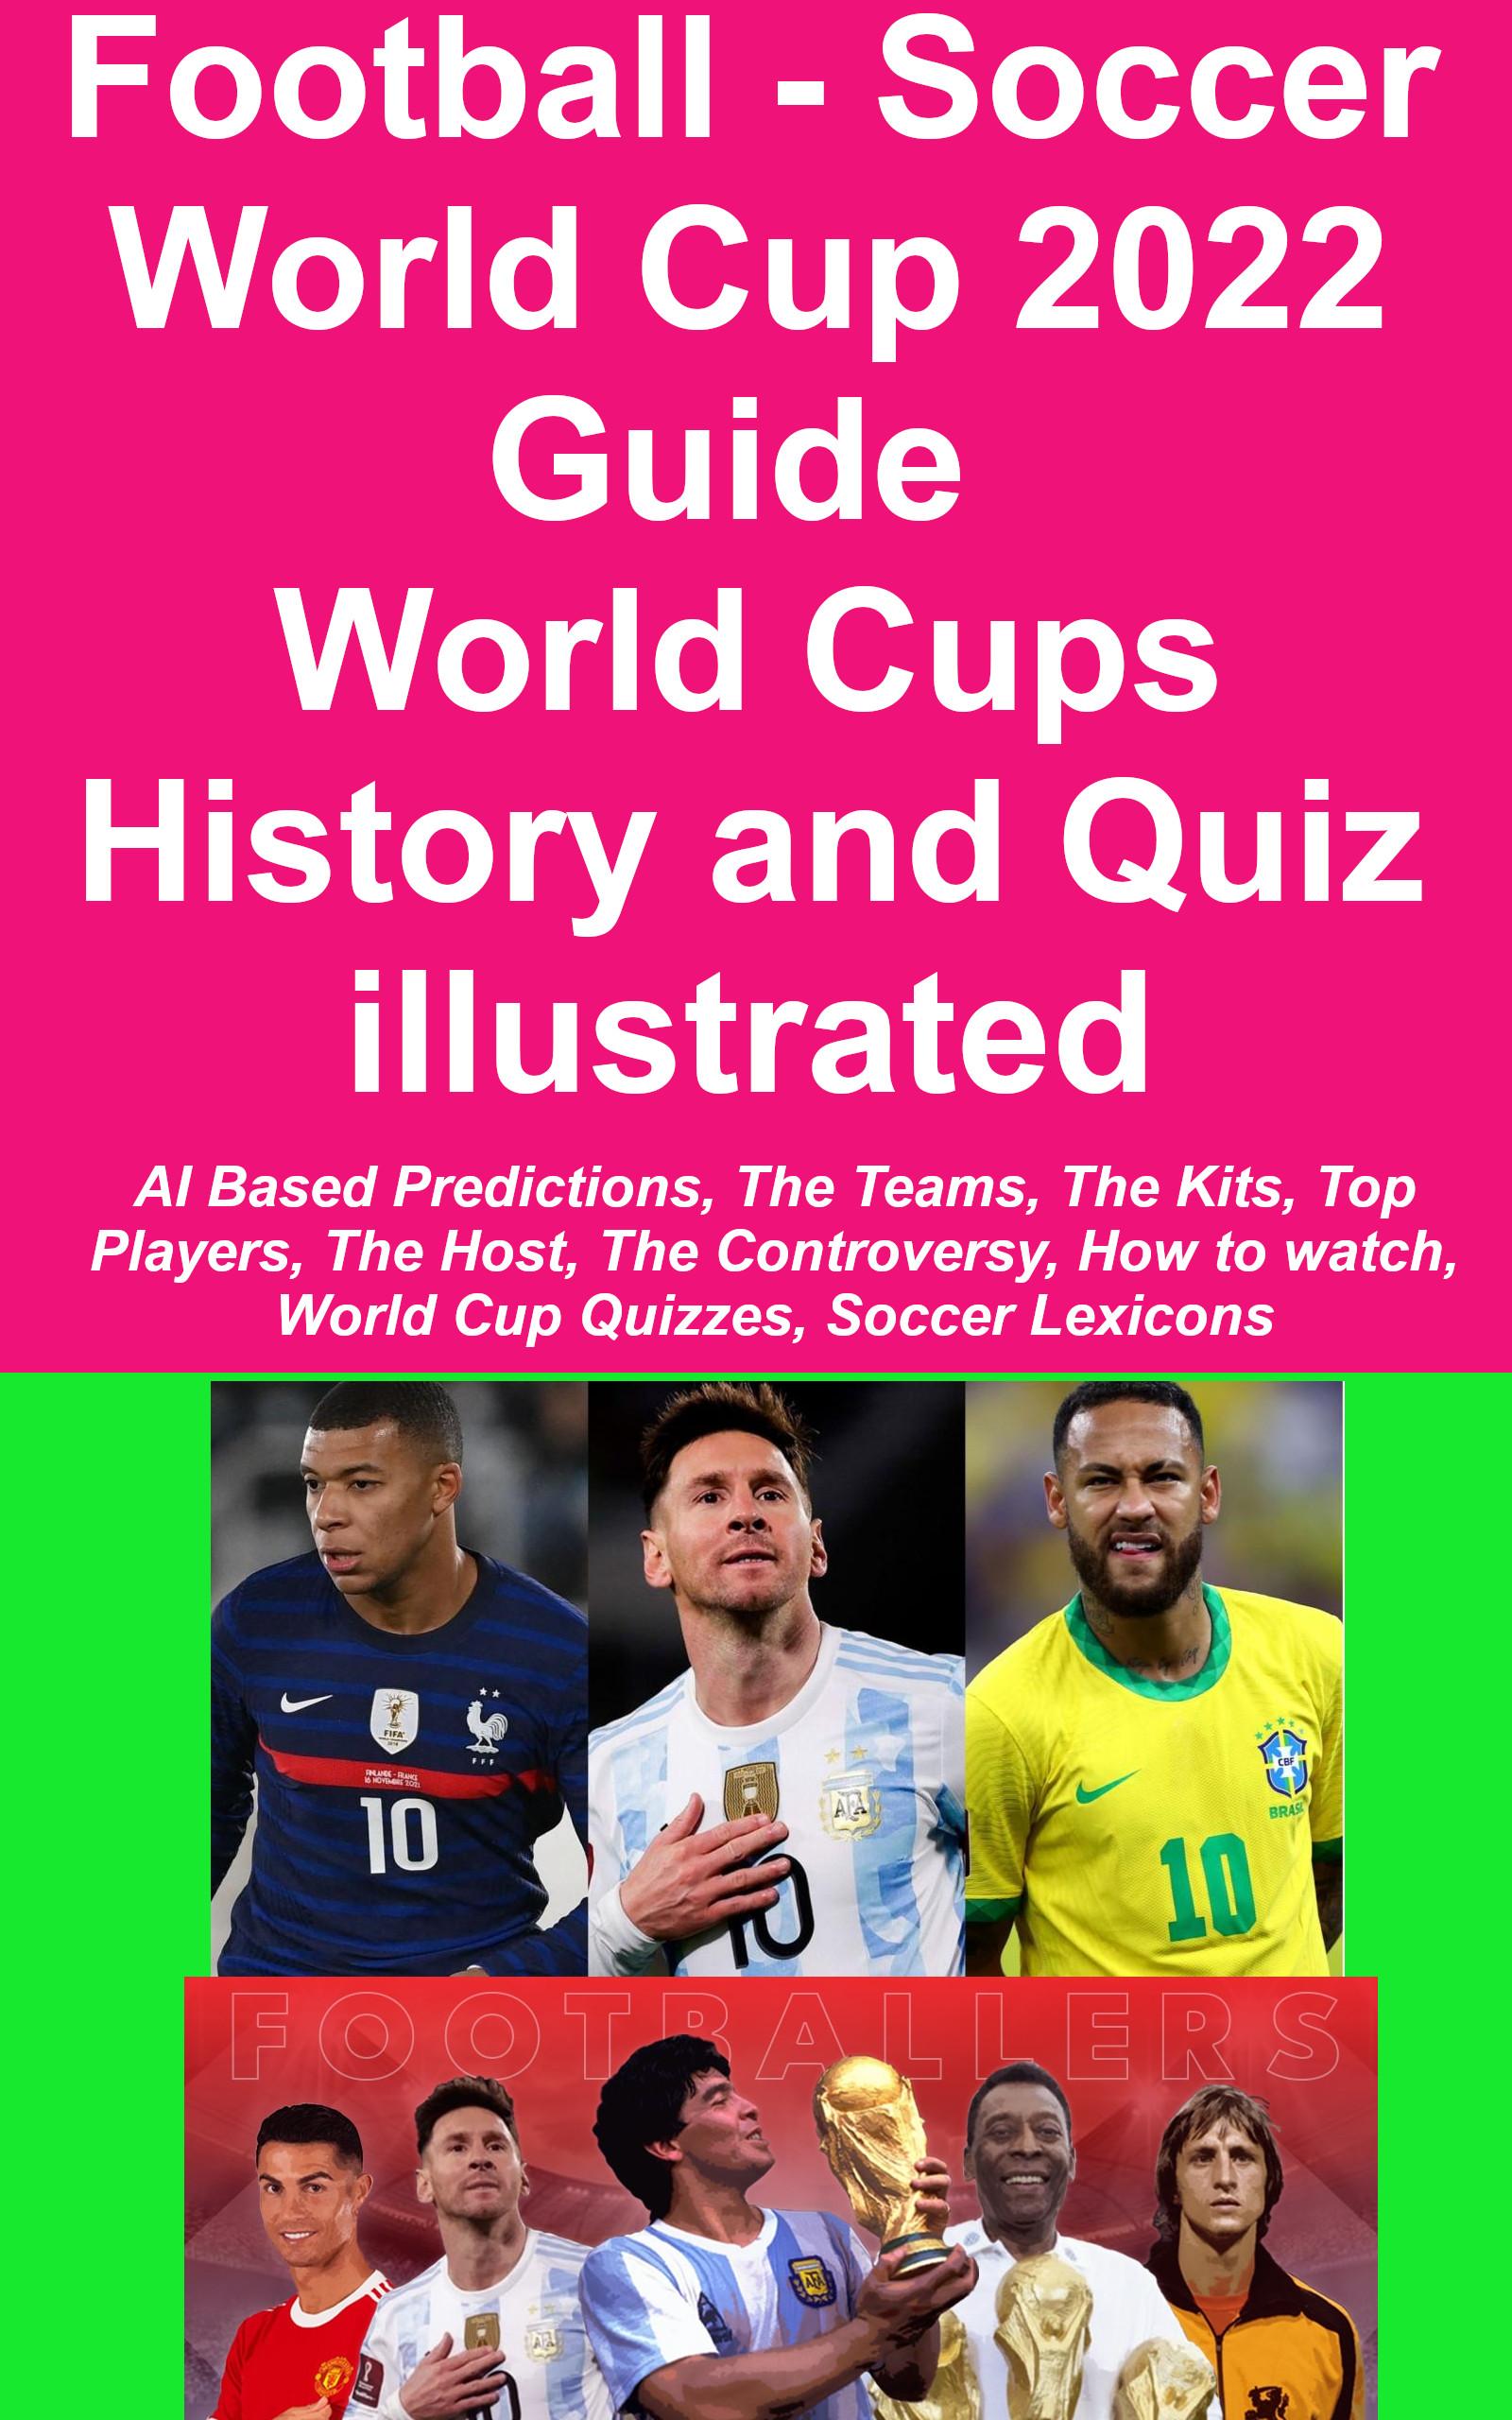 Football Soccer World Cup 2022 Guide and Past World Cups History and Quiz illustrated